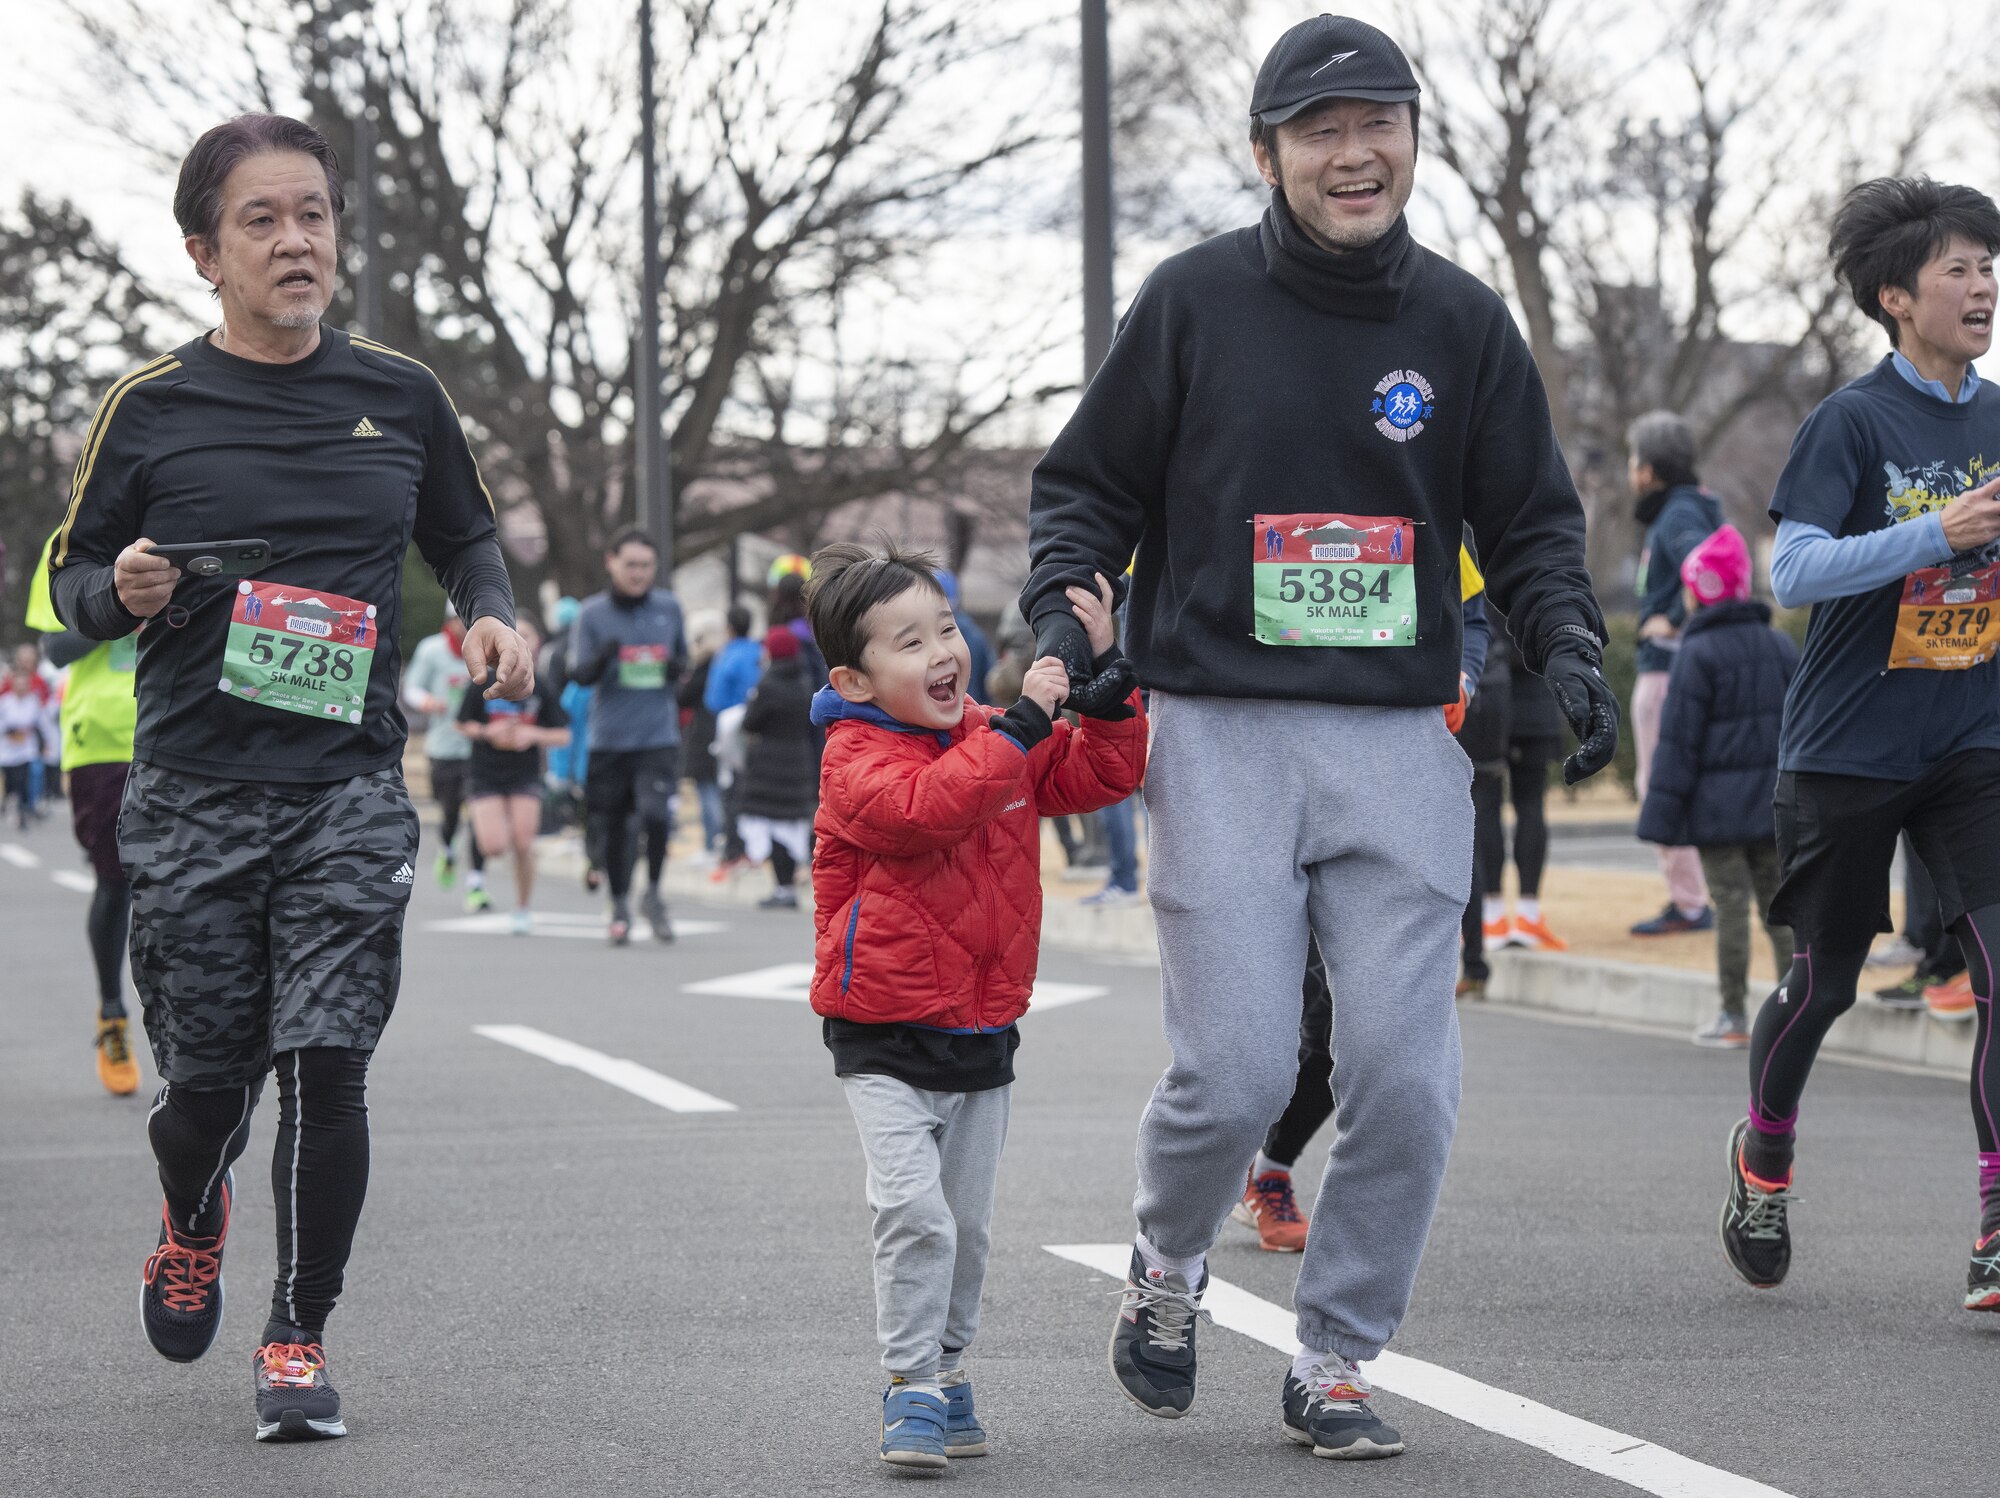 Runners participate in a 5-km run as part of the 42nd annual Frostbite Road Race.